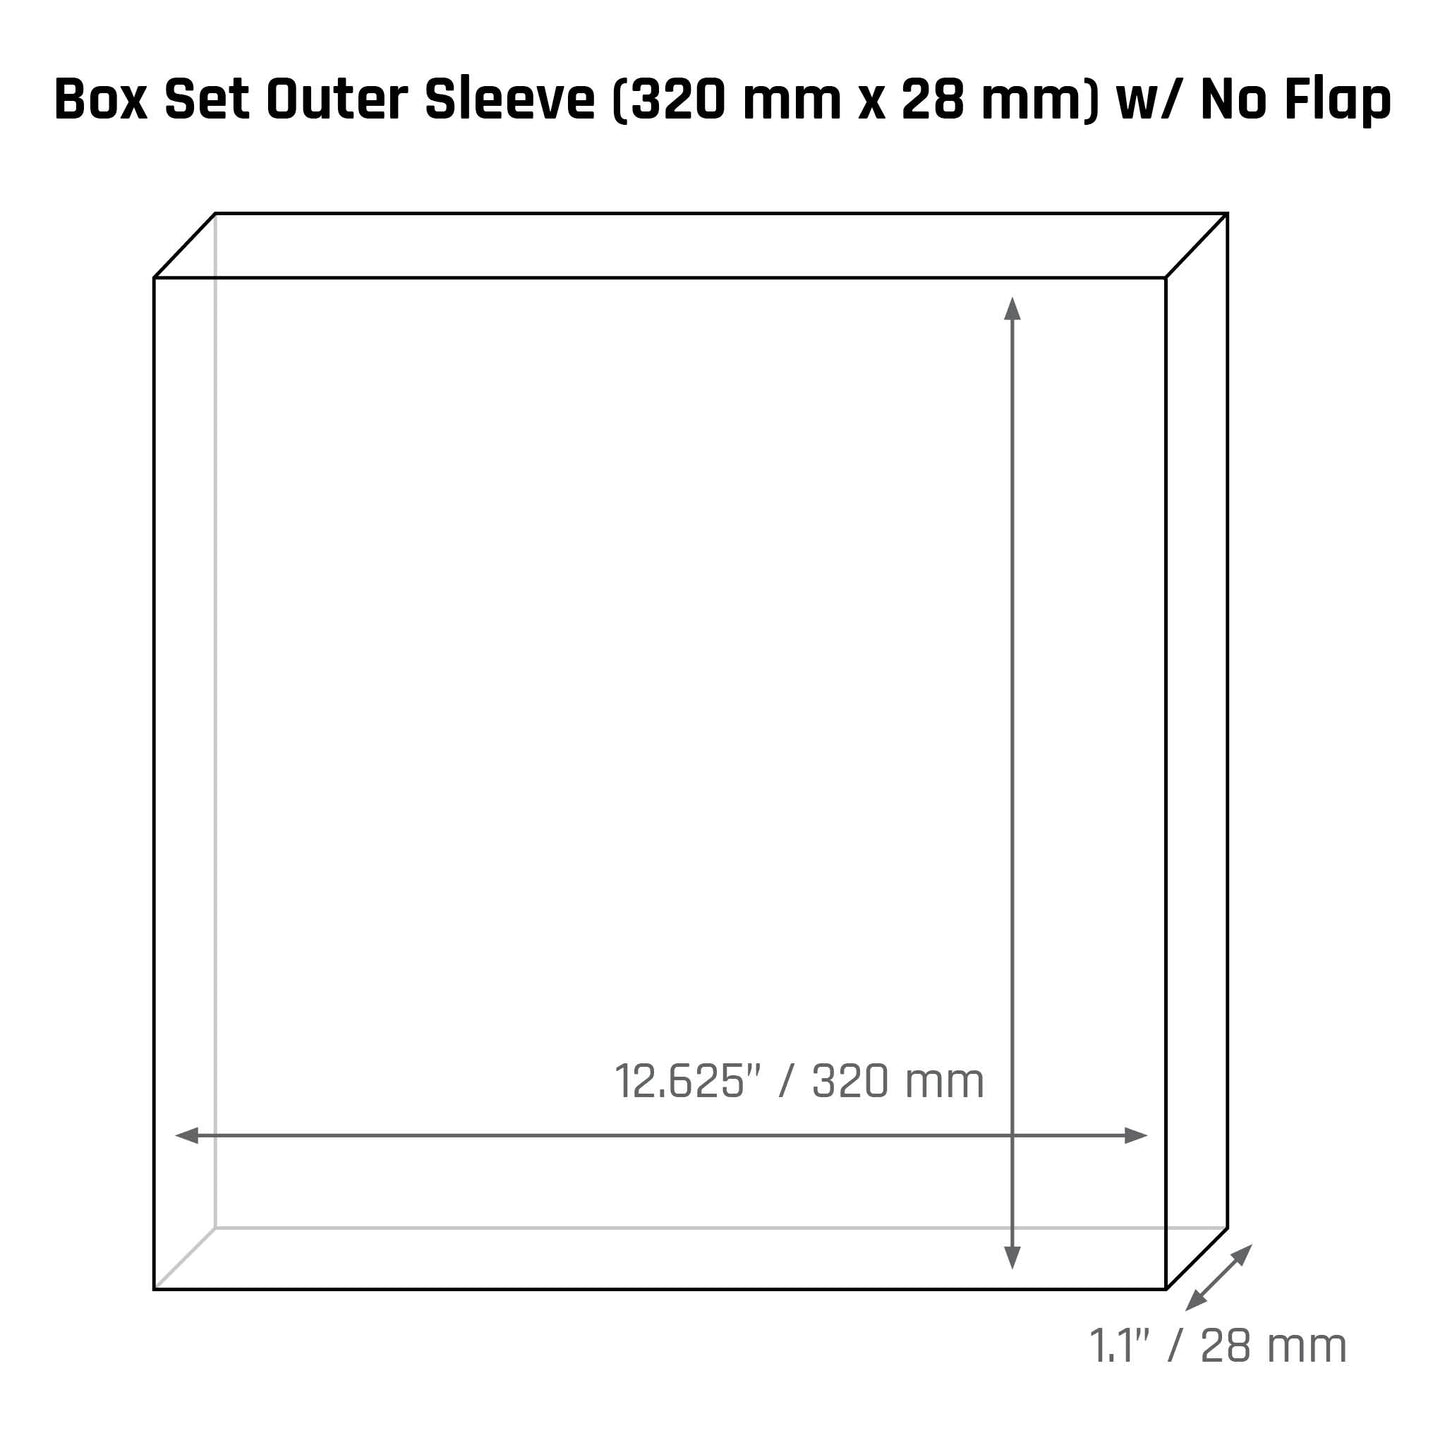 Box Set Outer Sleeve (320 mm x 28 mm) - 3mil - Vinyl Storage Solutions